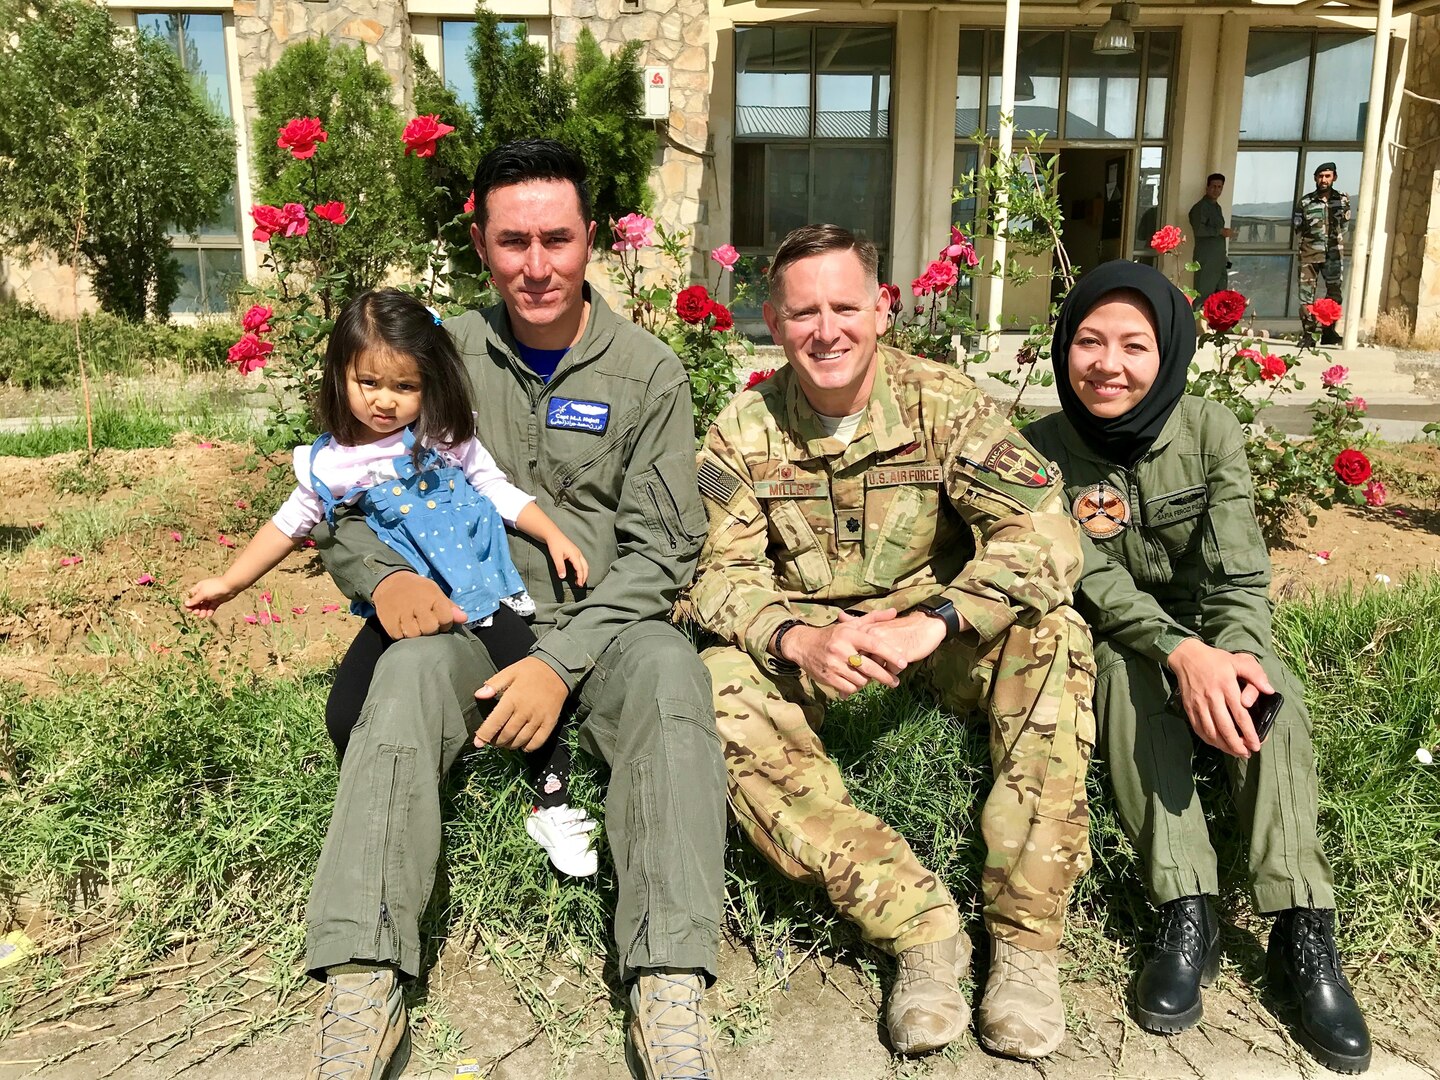 U.S. Air Force Lt. Col. Carl Miller (center), 538th Air Expeditionary Advisory Squadron commander, with married Afghan air force pilots at Hamid Karzai International Airport in Kabul, Afghanistan in May 2019. Miller was named a 2019 Lance P. Sijan United States Air Force Leadership Award winner in the senior officer category. (Courtesy Photo)